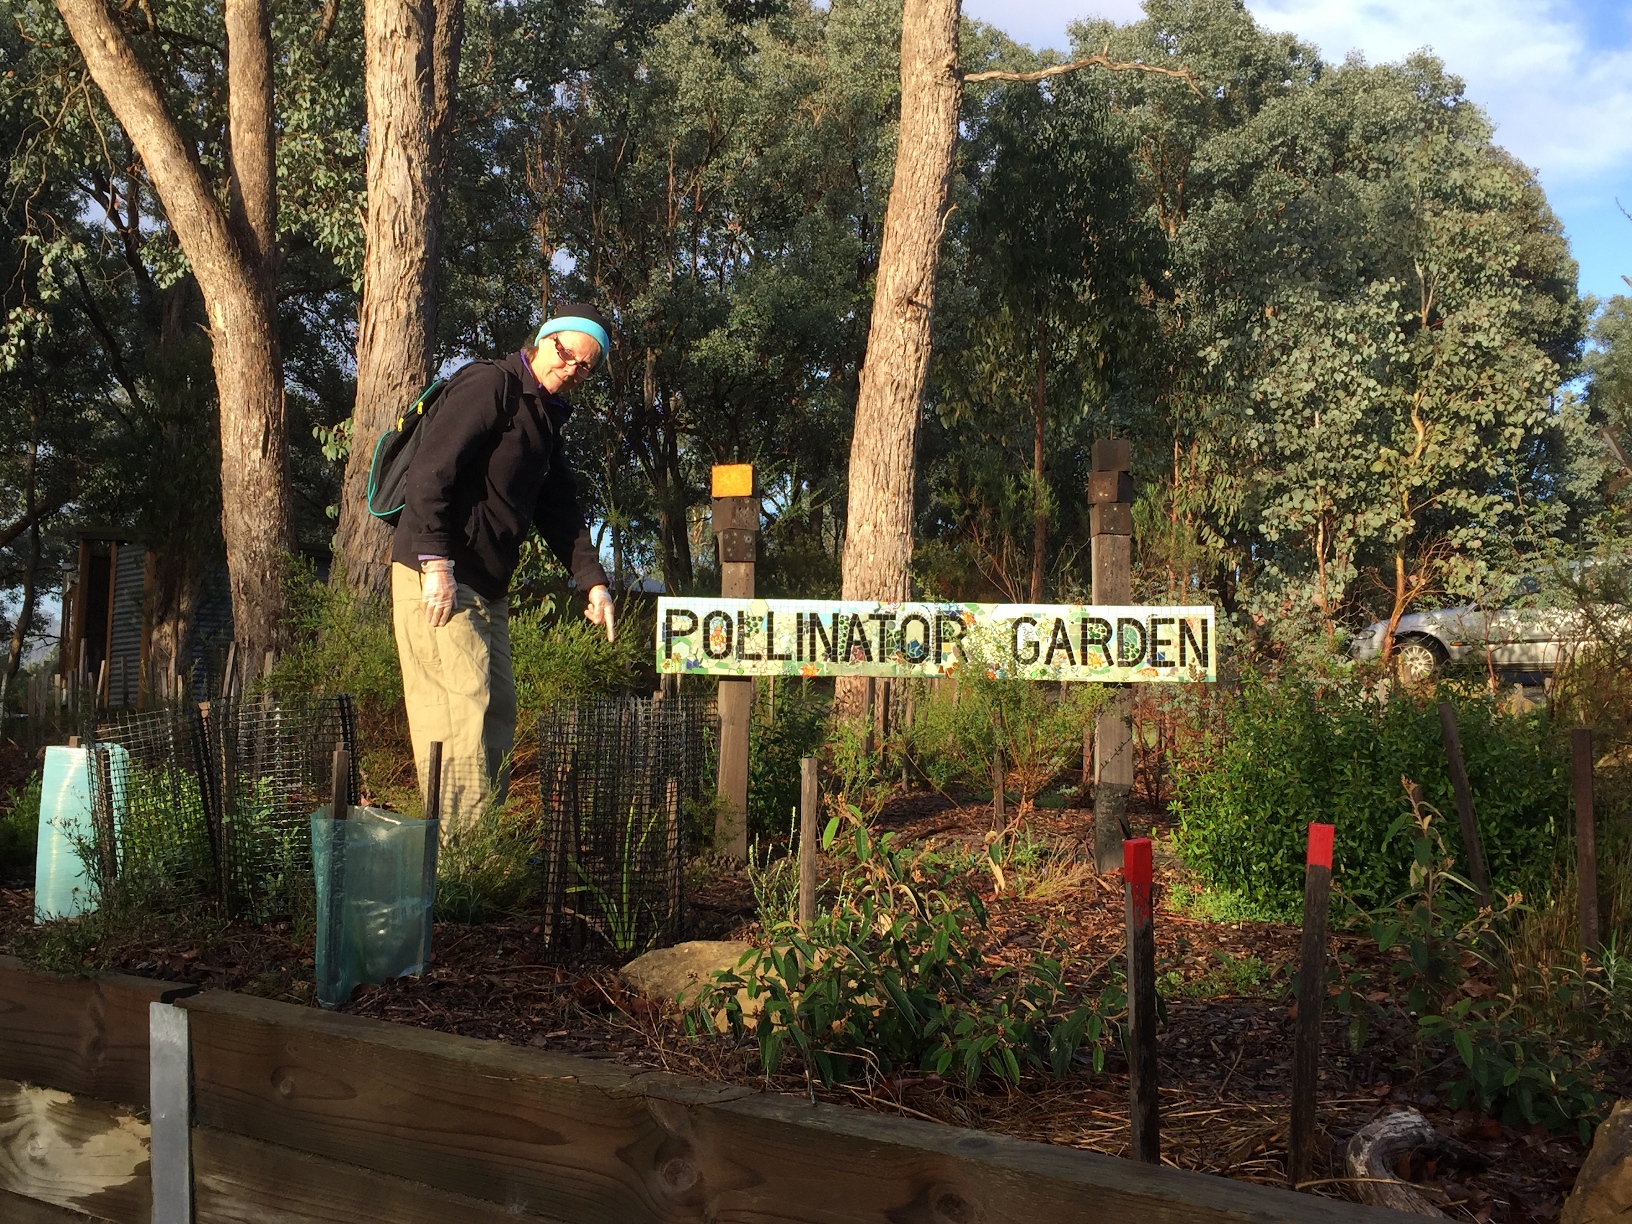 16 - May 2018 - Pollinator garden sign with its creator